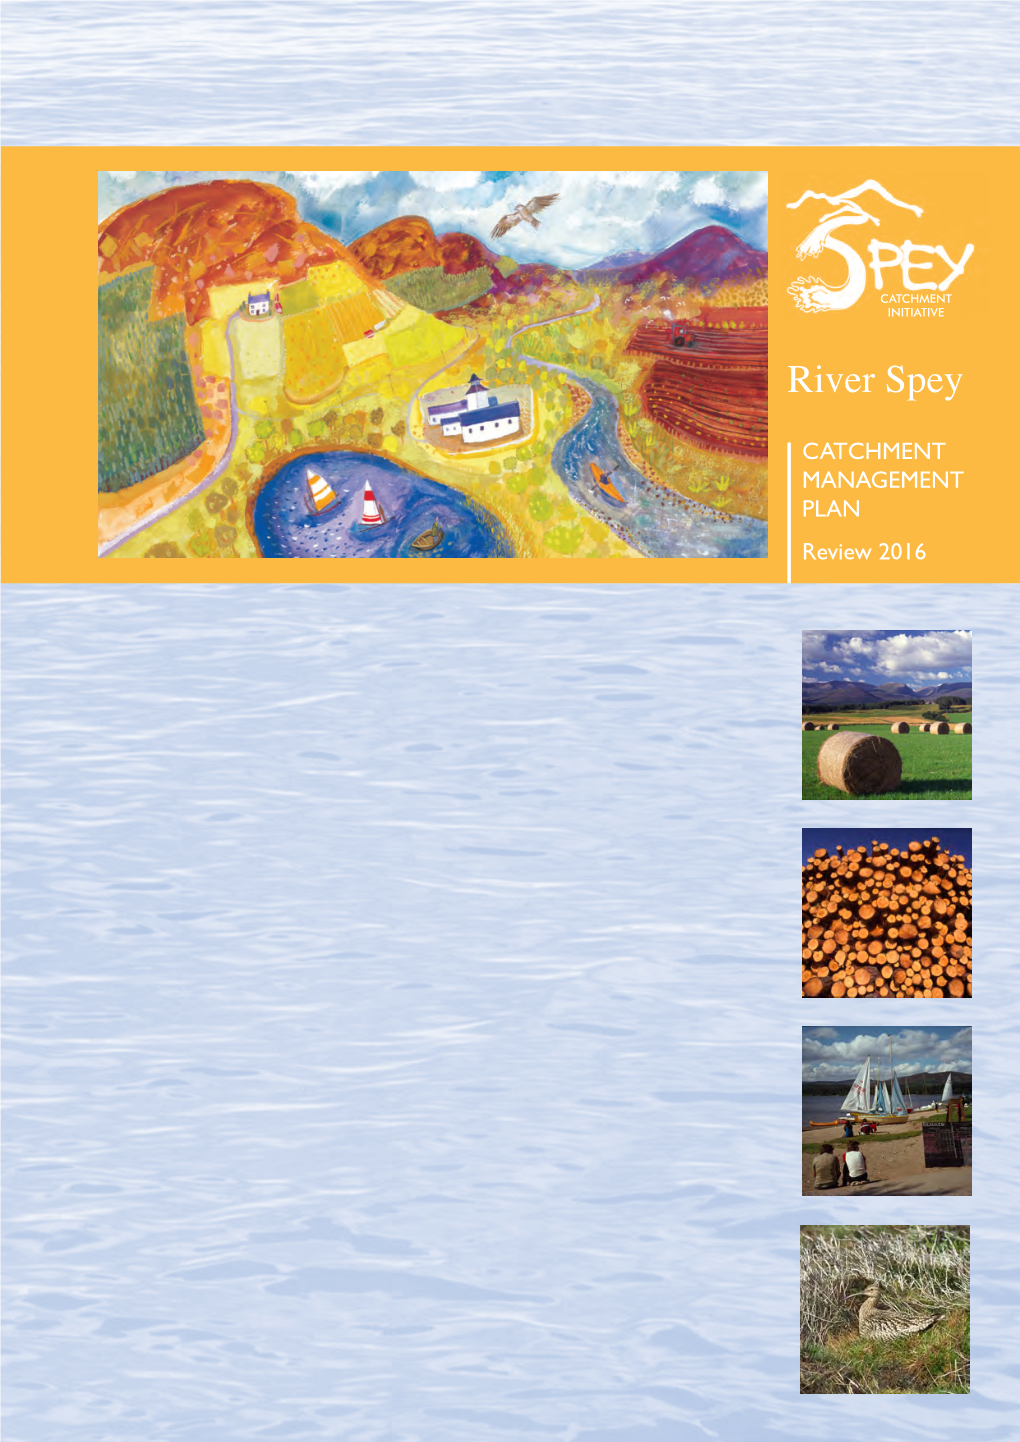 Download the River Spey Catchment Management Review 2016 Here